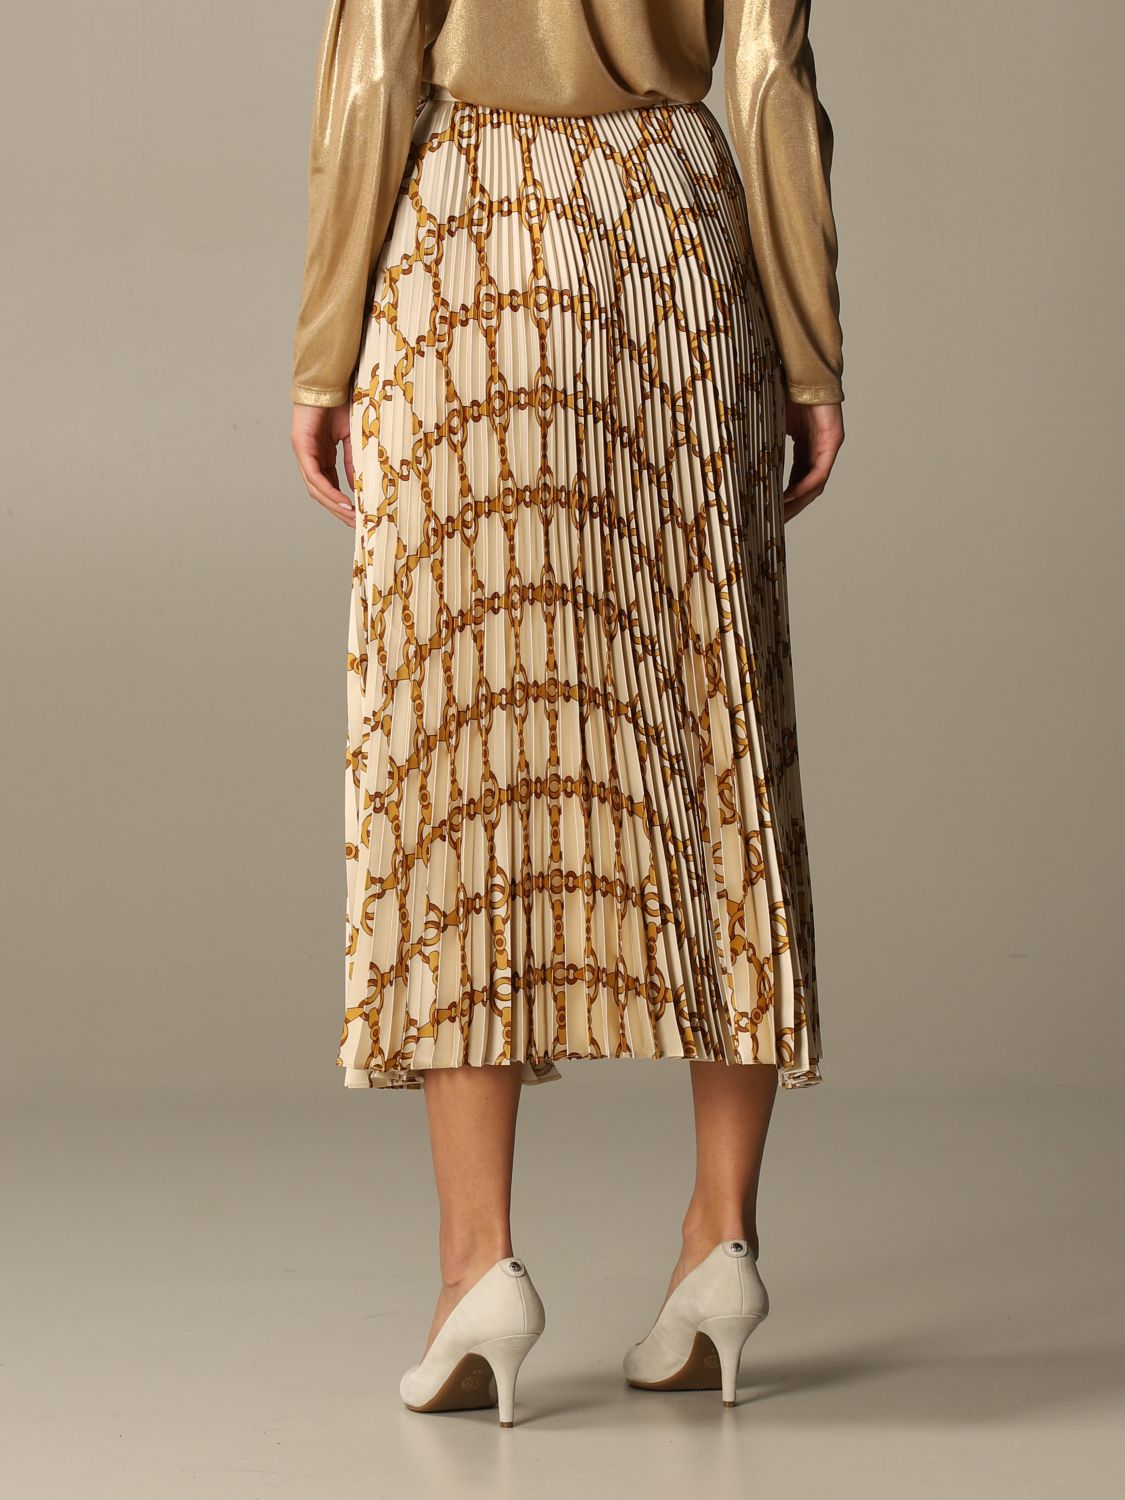 Twinset Outlet Twin Set Long Pleated Skirt With Chain Pattern Yellow Cream Skirt Twinset 